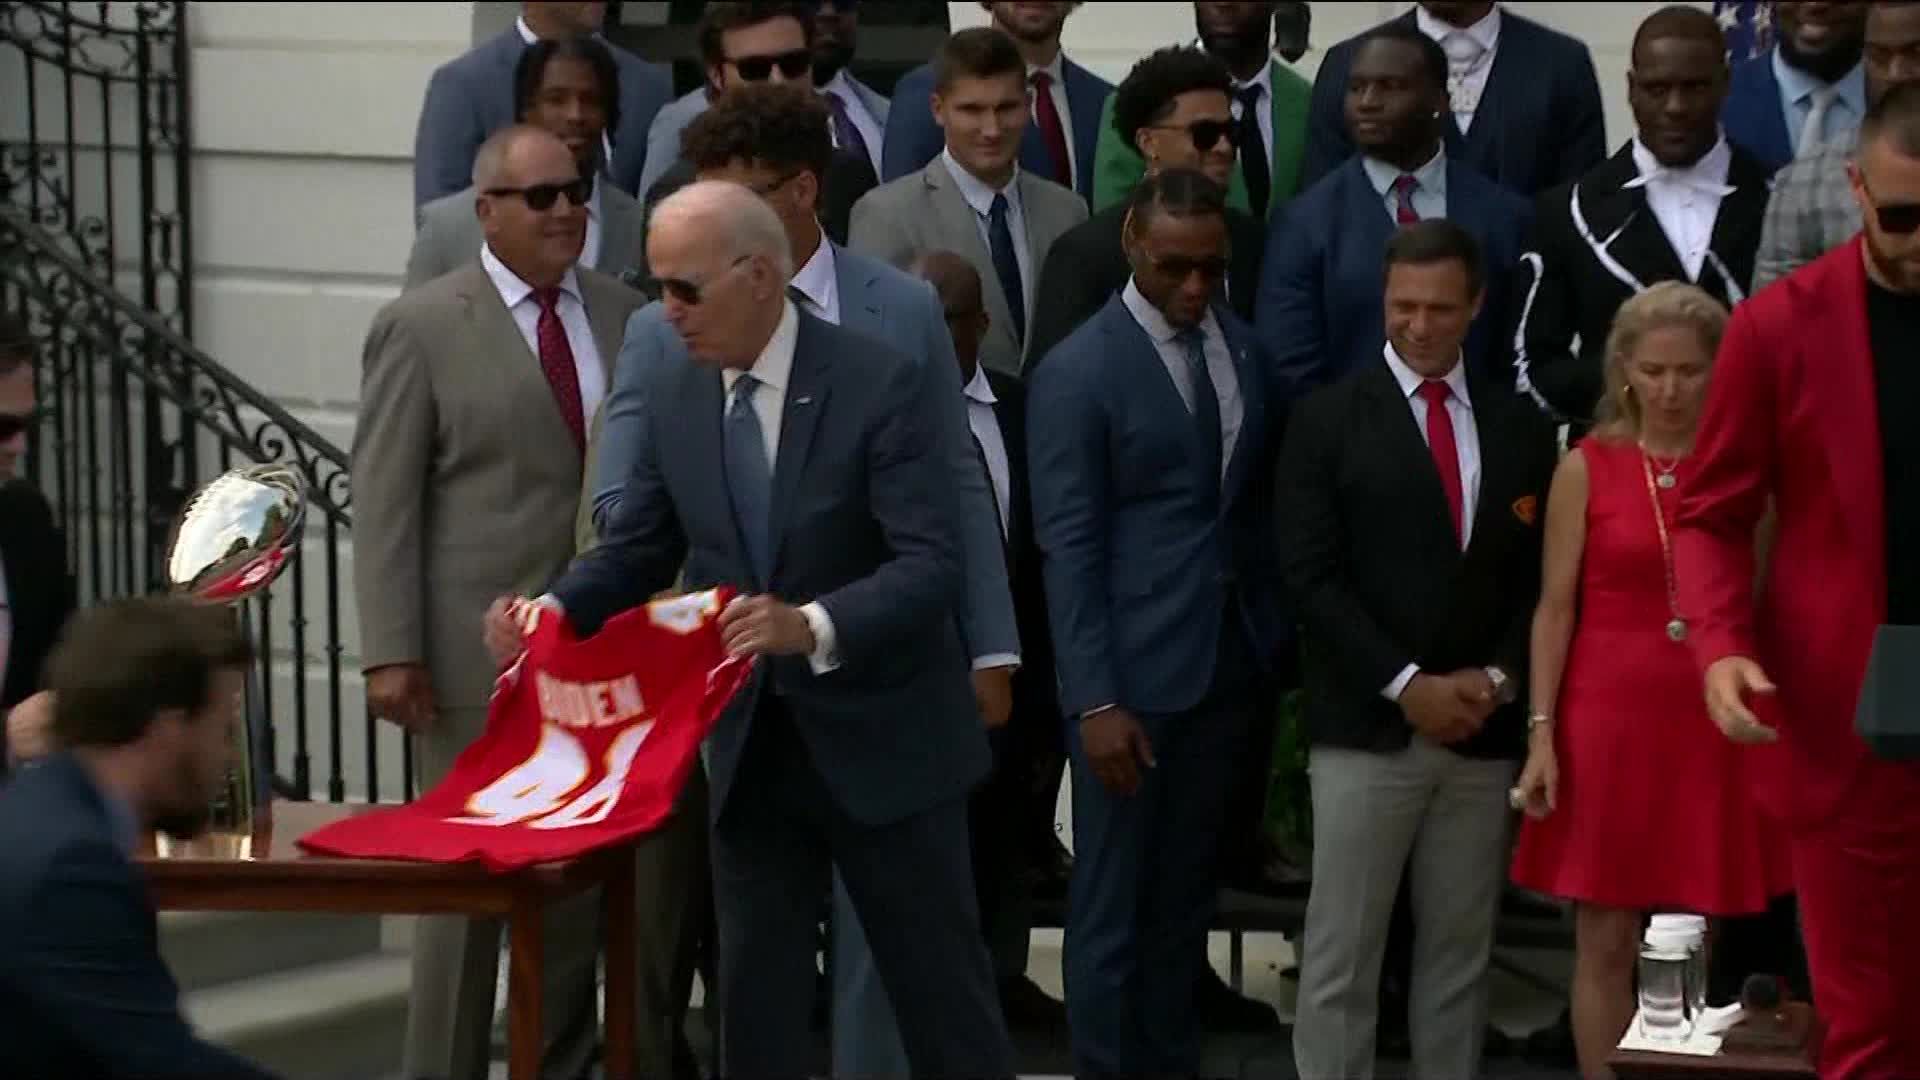 Patrick Mahomes intercepts Travis Kelce's attempt to give speech at White House celebration